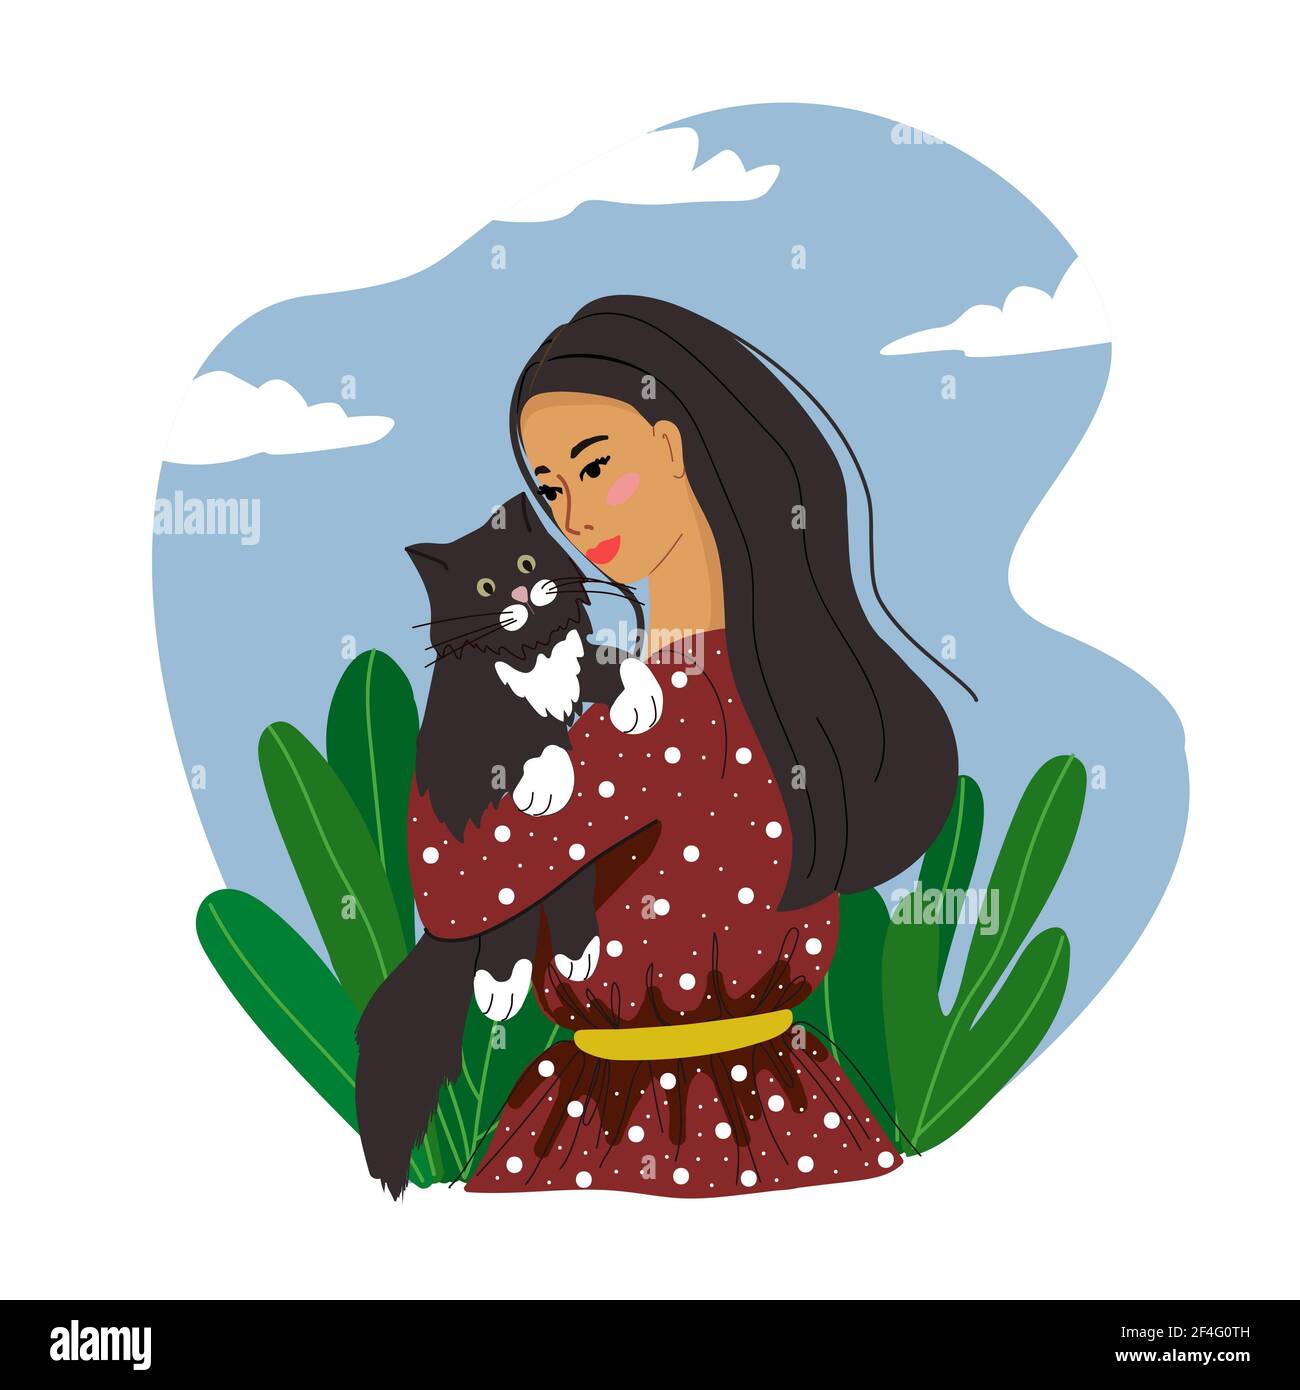 Happy pet owners, people and pets, cats, dogs, vector illustration in flat style. Stock Photo